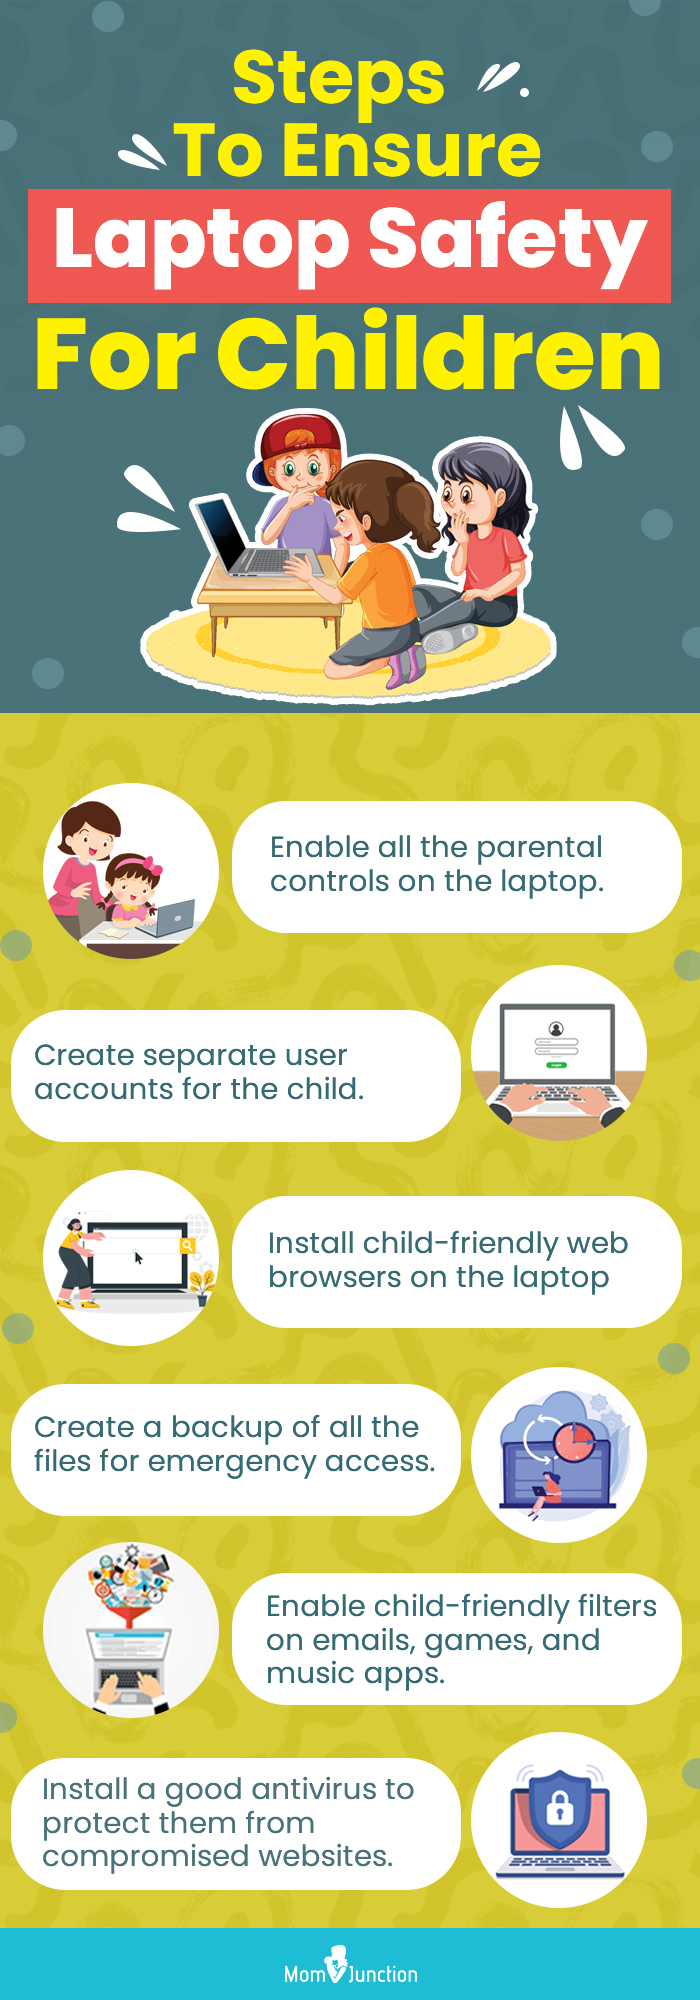 Steps To Ensure Laptop Safety For Children